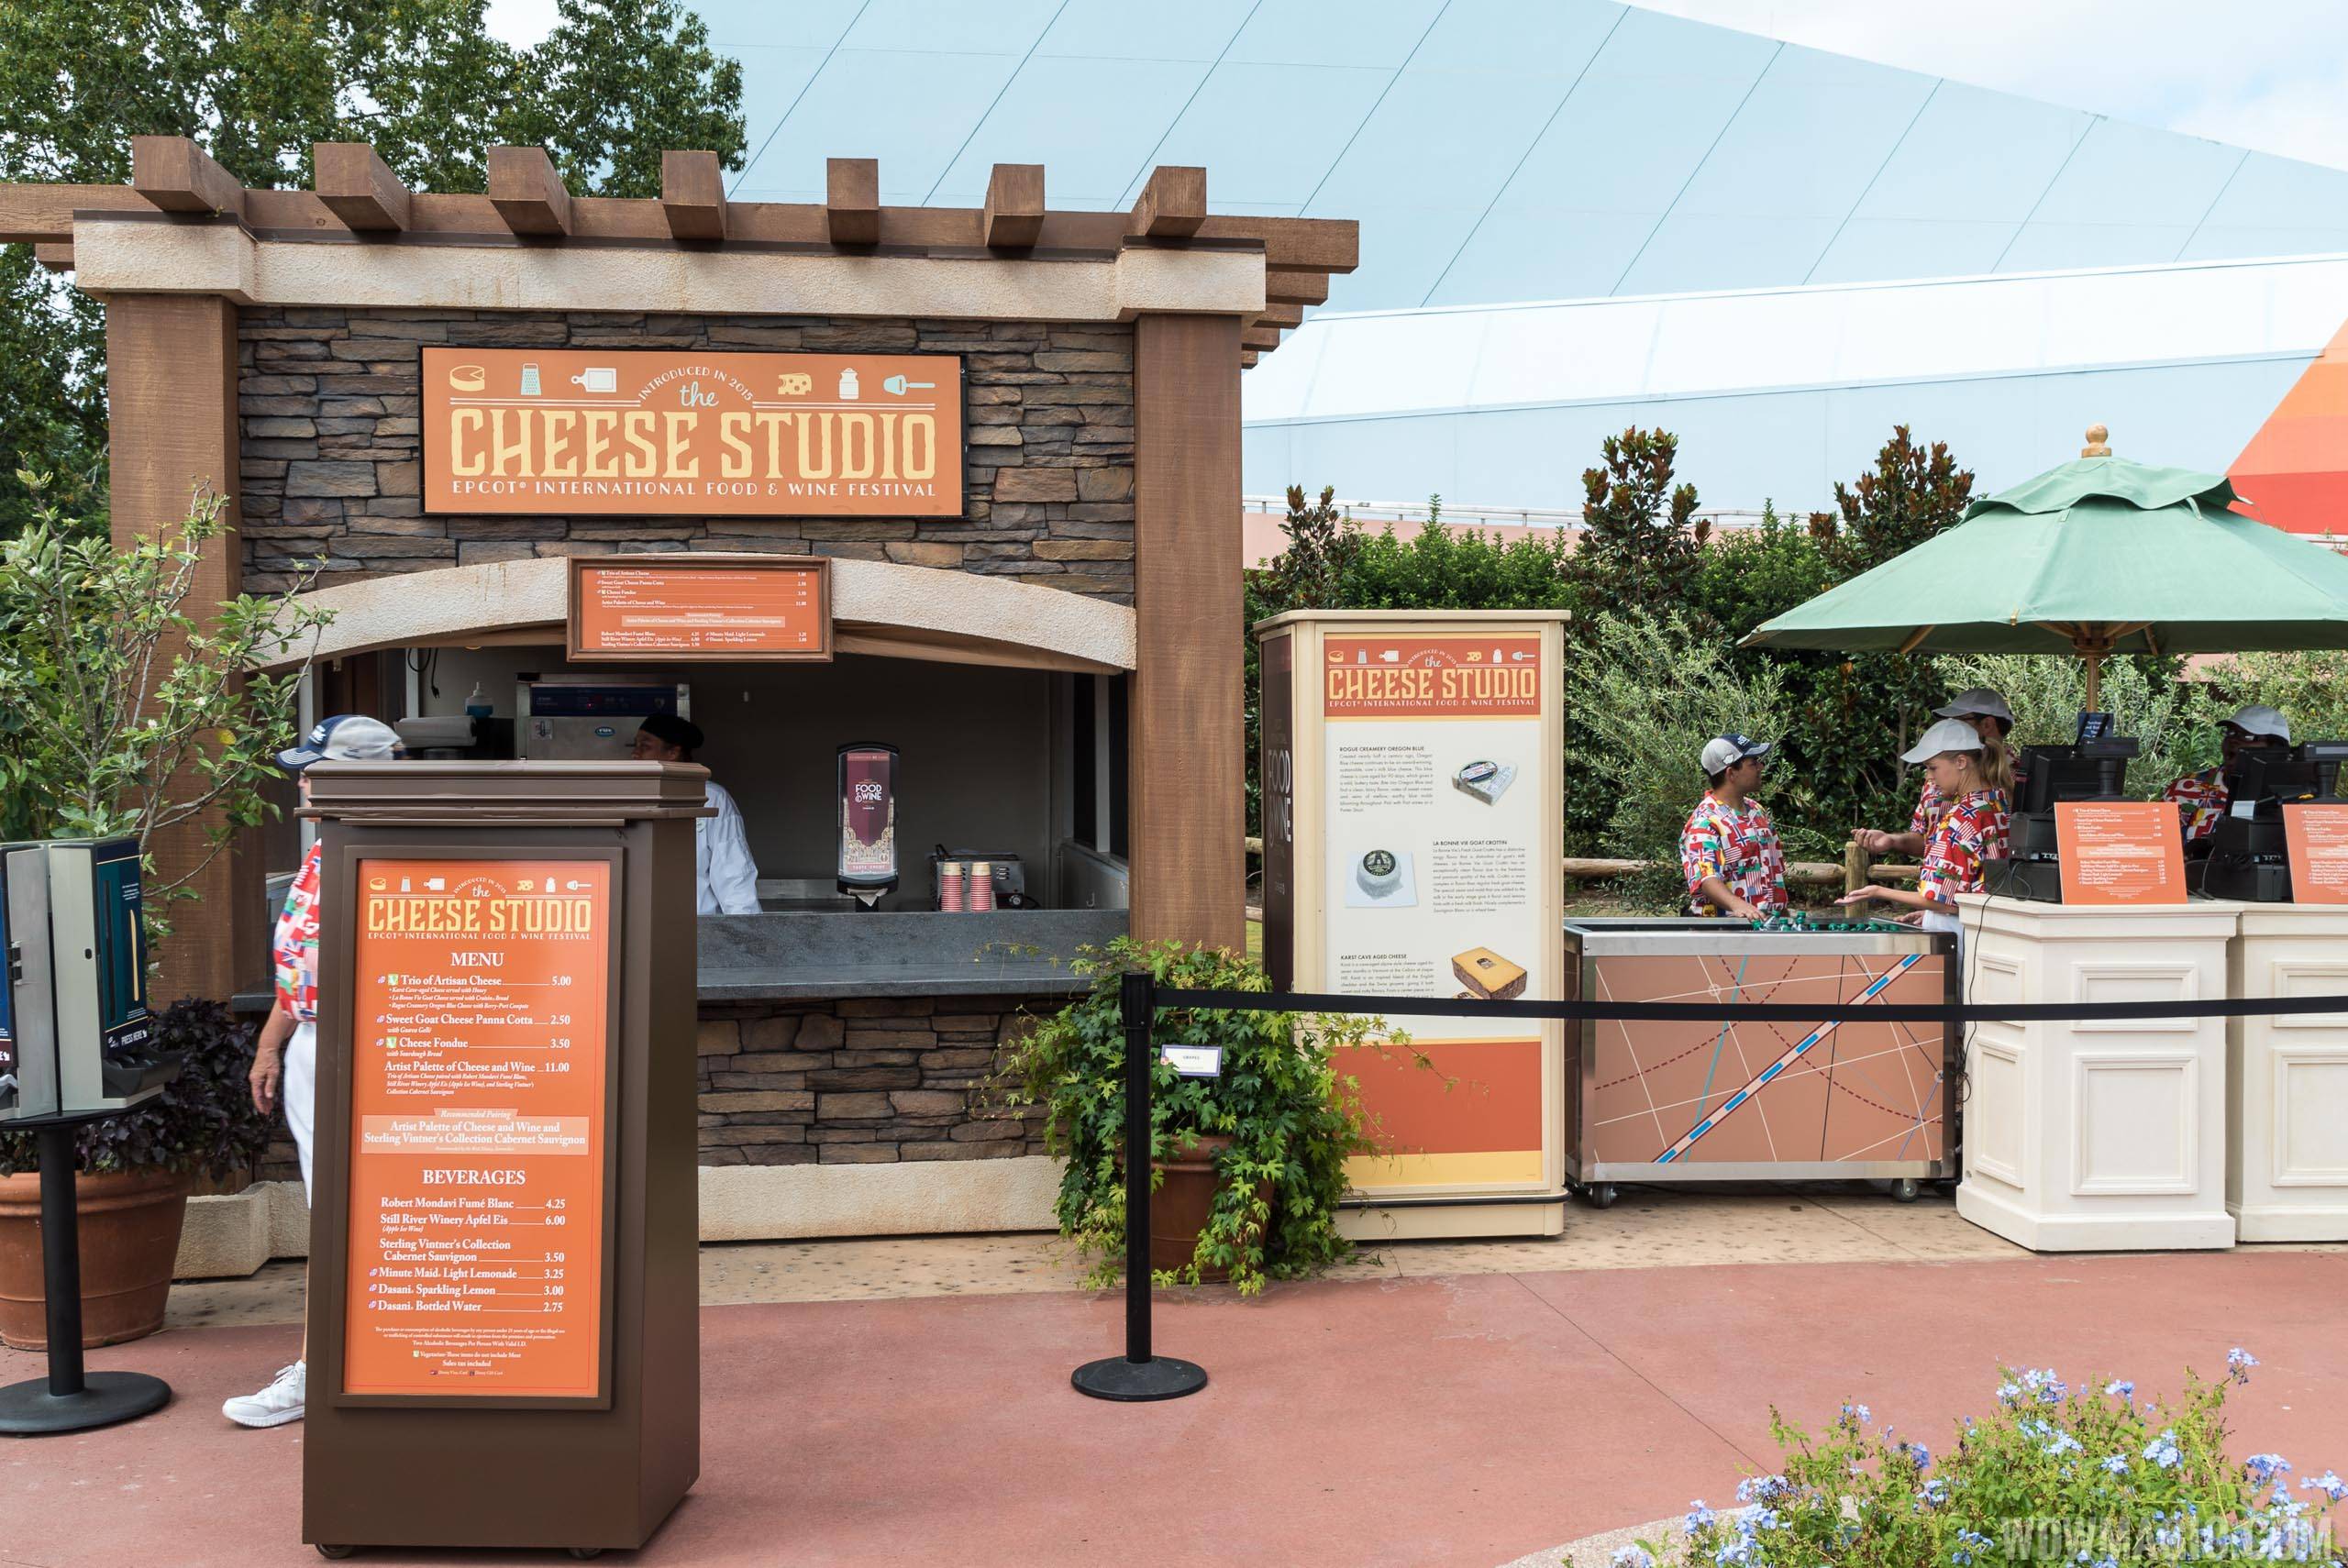 2015 Epcot Food and Wine Festival Marketplace kiosk menus and pricing